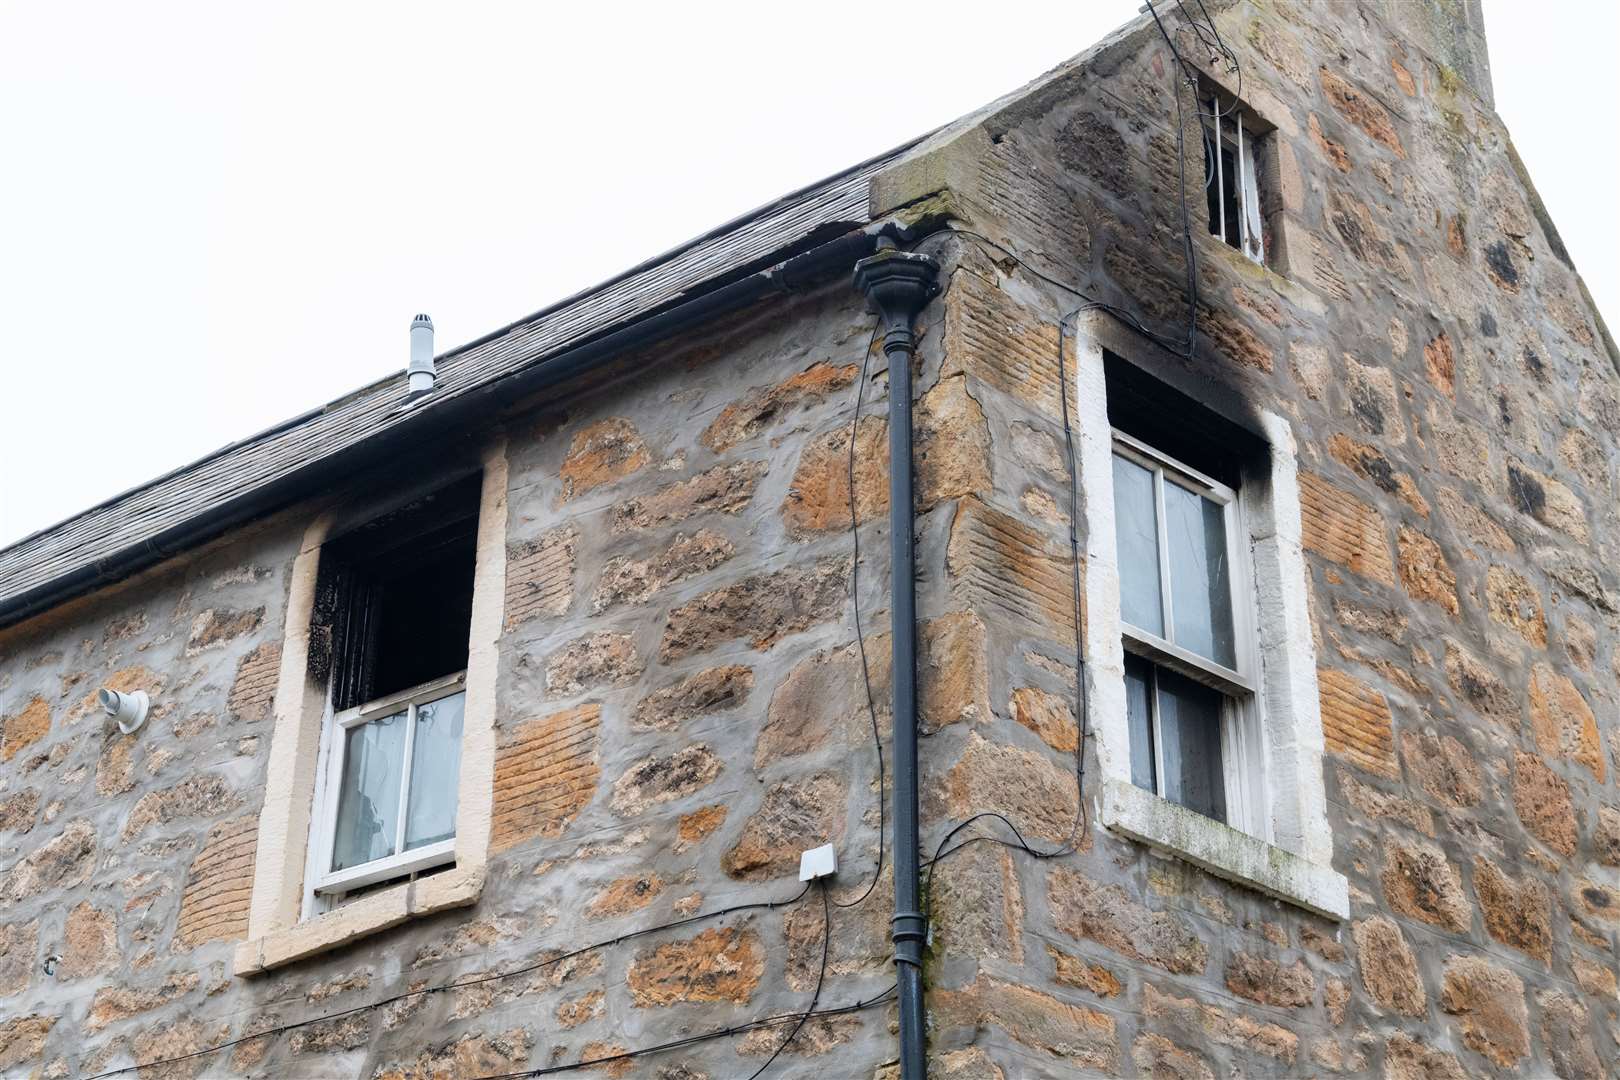 Fire and Police were informed of a house fire on Tuesday April 9 on Urquhart Street, Forres.